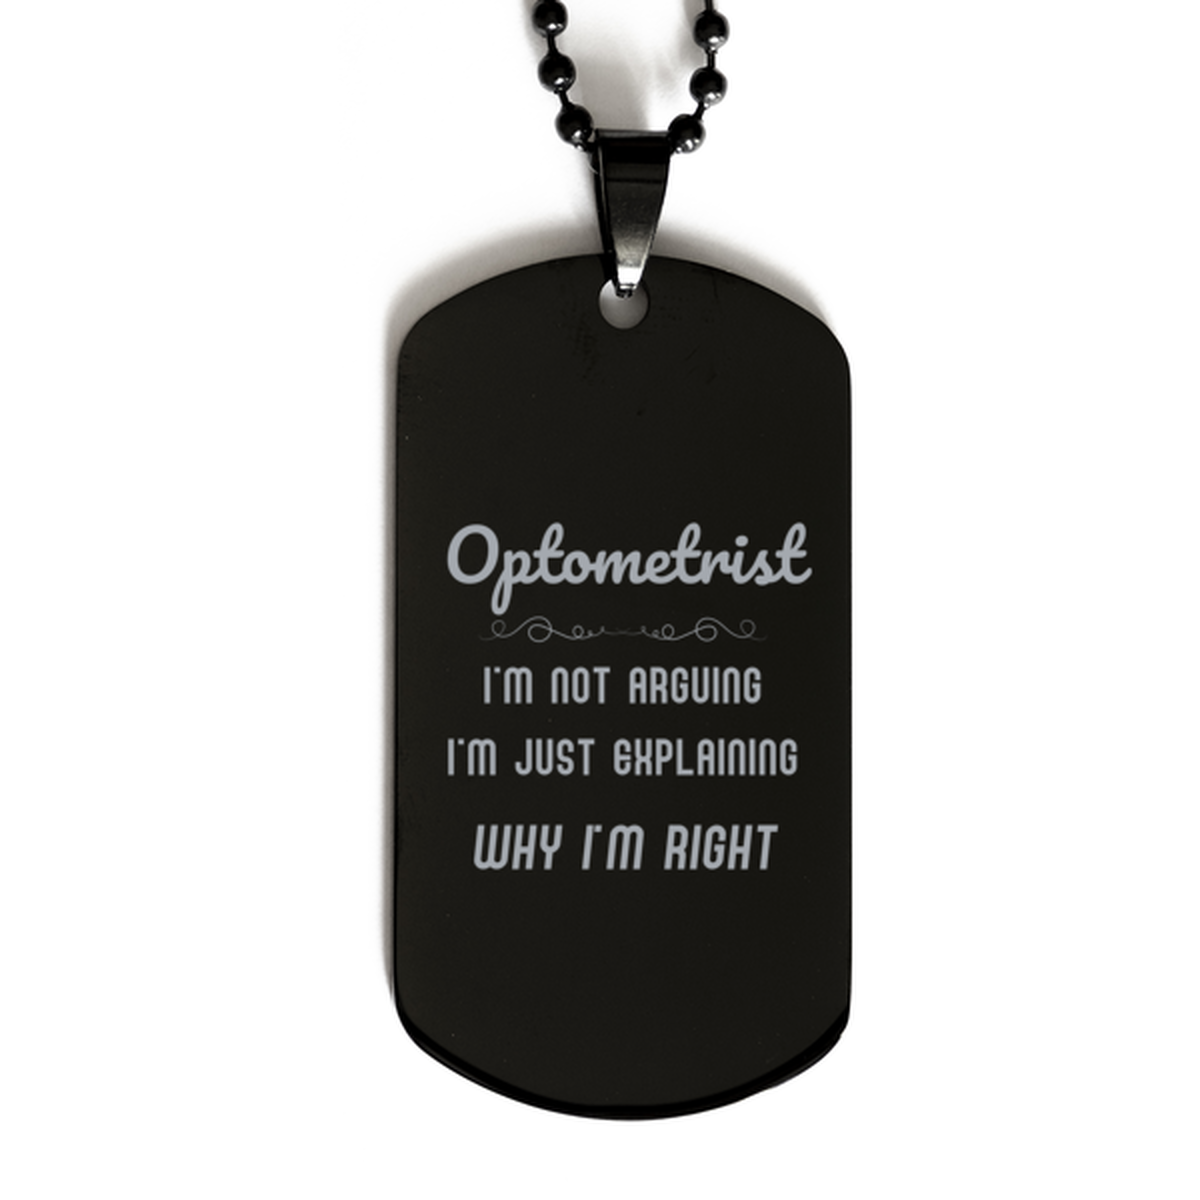 Optometrist I'm not Arguing. I'm Just Explaining Why I'm RIGHT Black Dog Tag, Funny Saying Quote Optometrist Gifts For Optometrist Graduation Birthday Christmas Gifts for Men Women Coworker